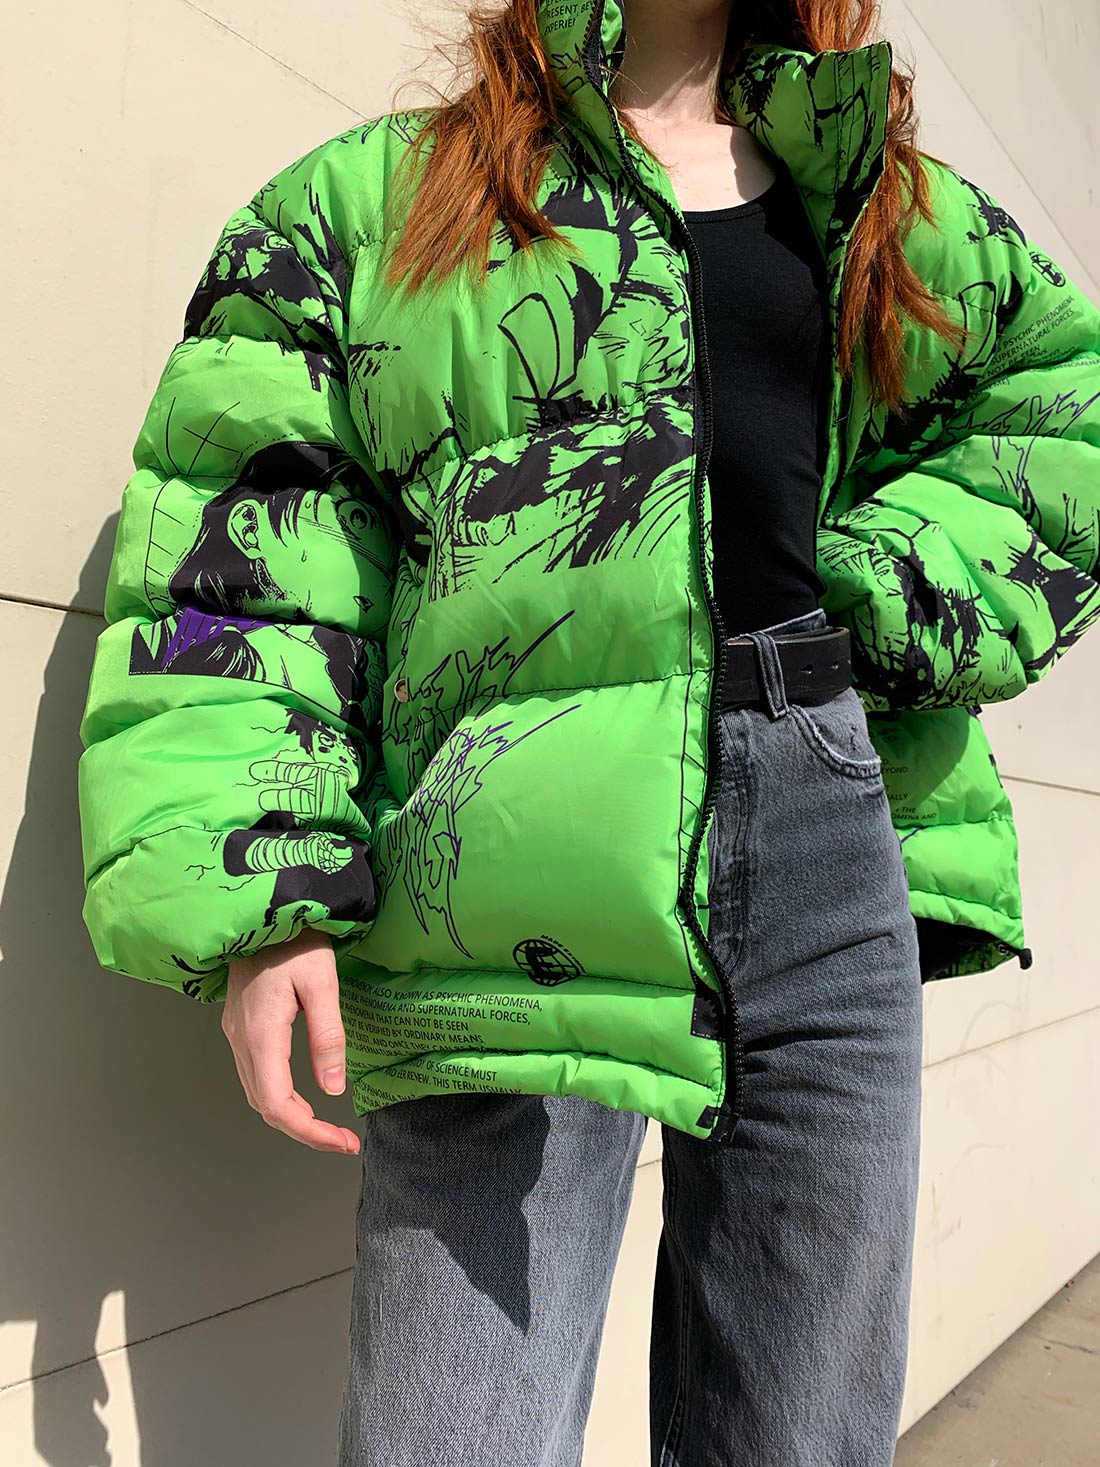 The Cool Anime Bomber My Mom and I Bought on Instagram - Sea of Shoes